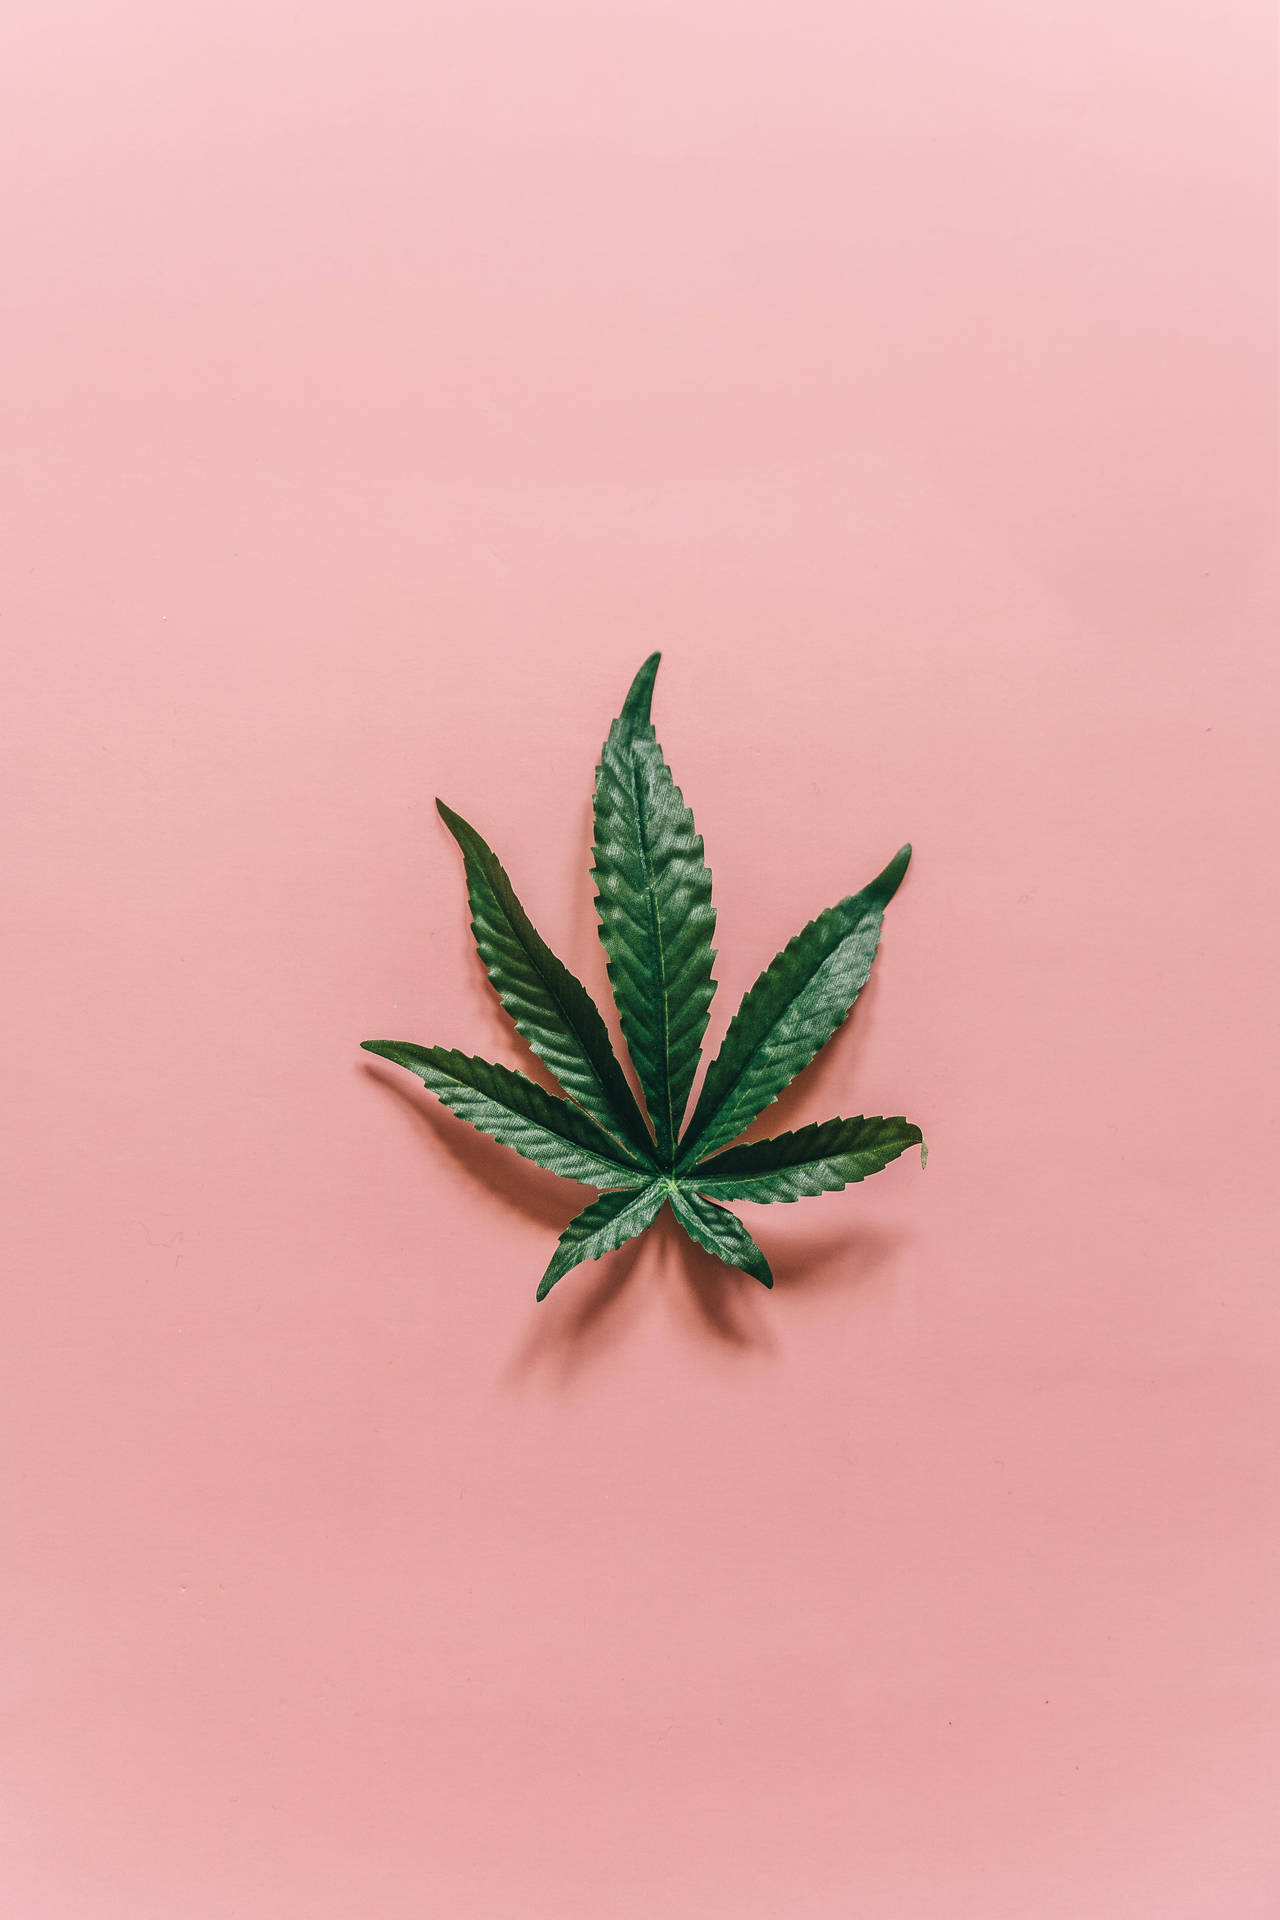 Cool Weed Pink Background Background